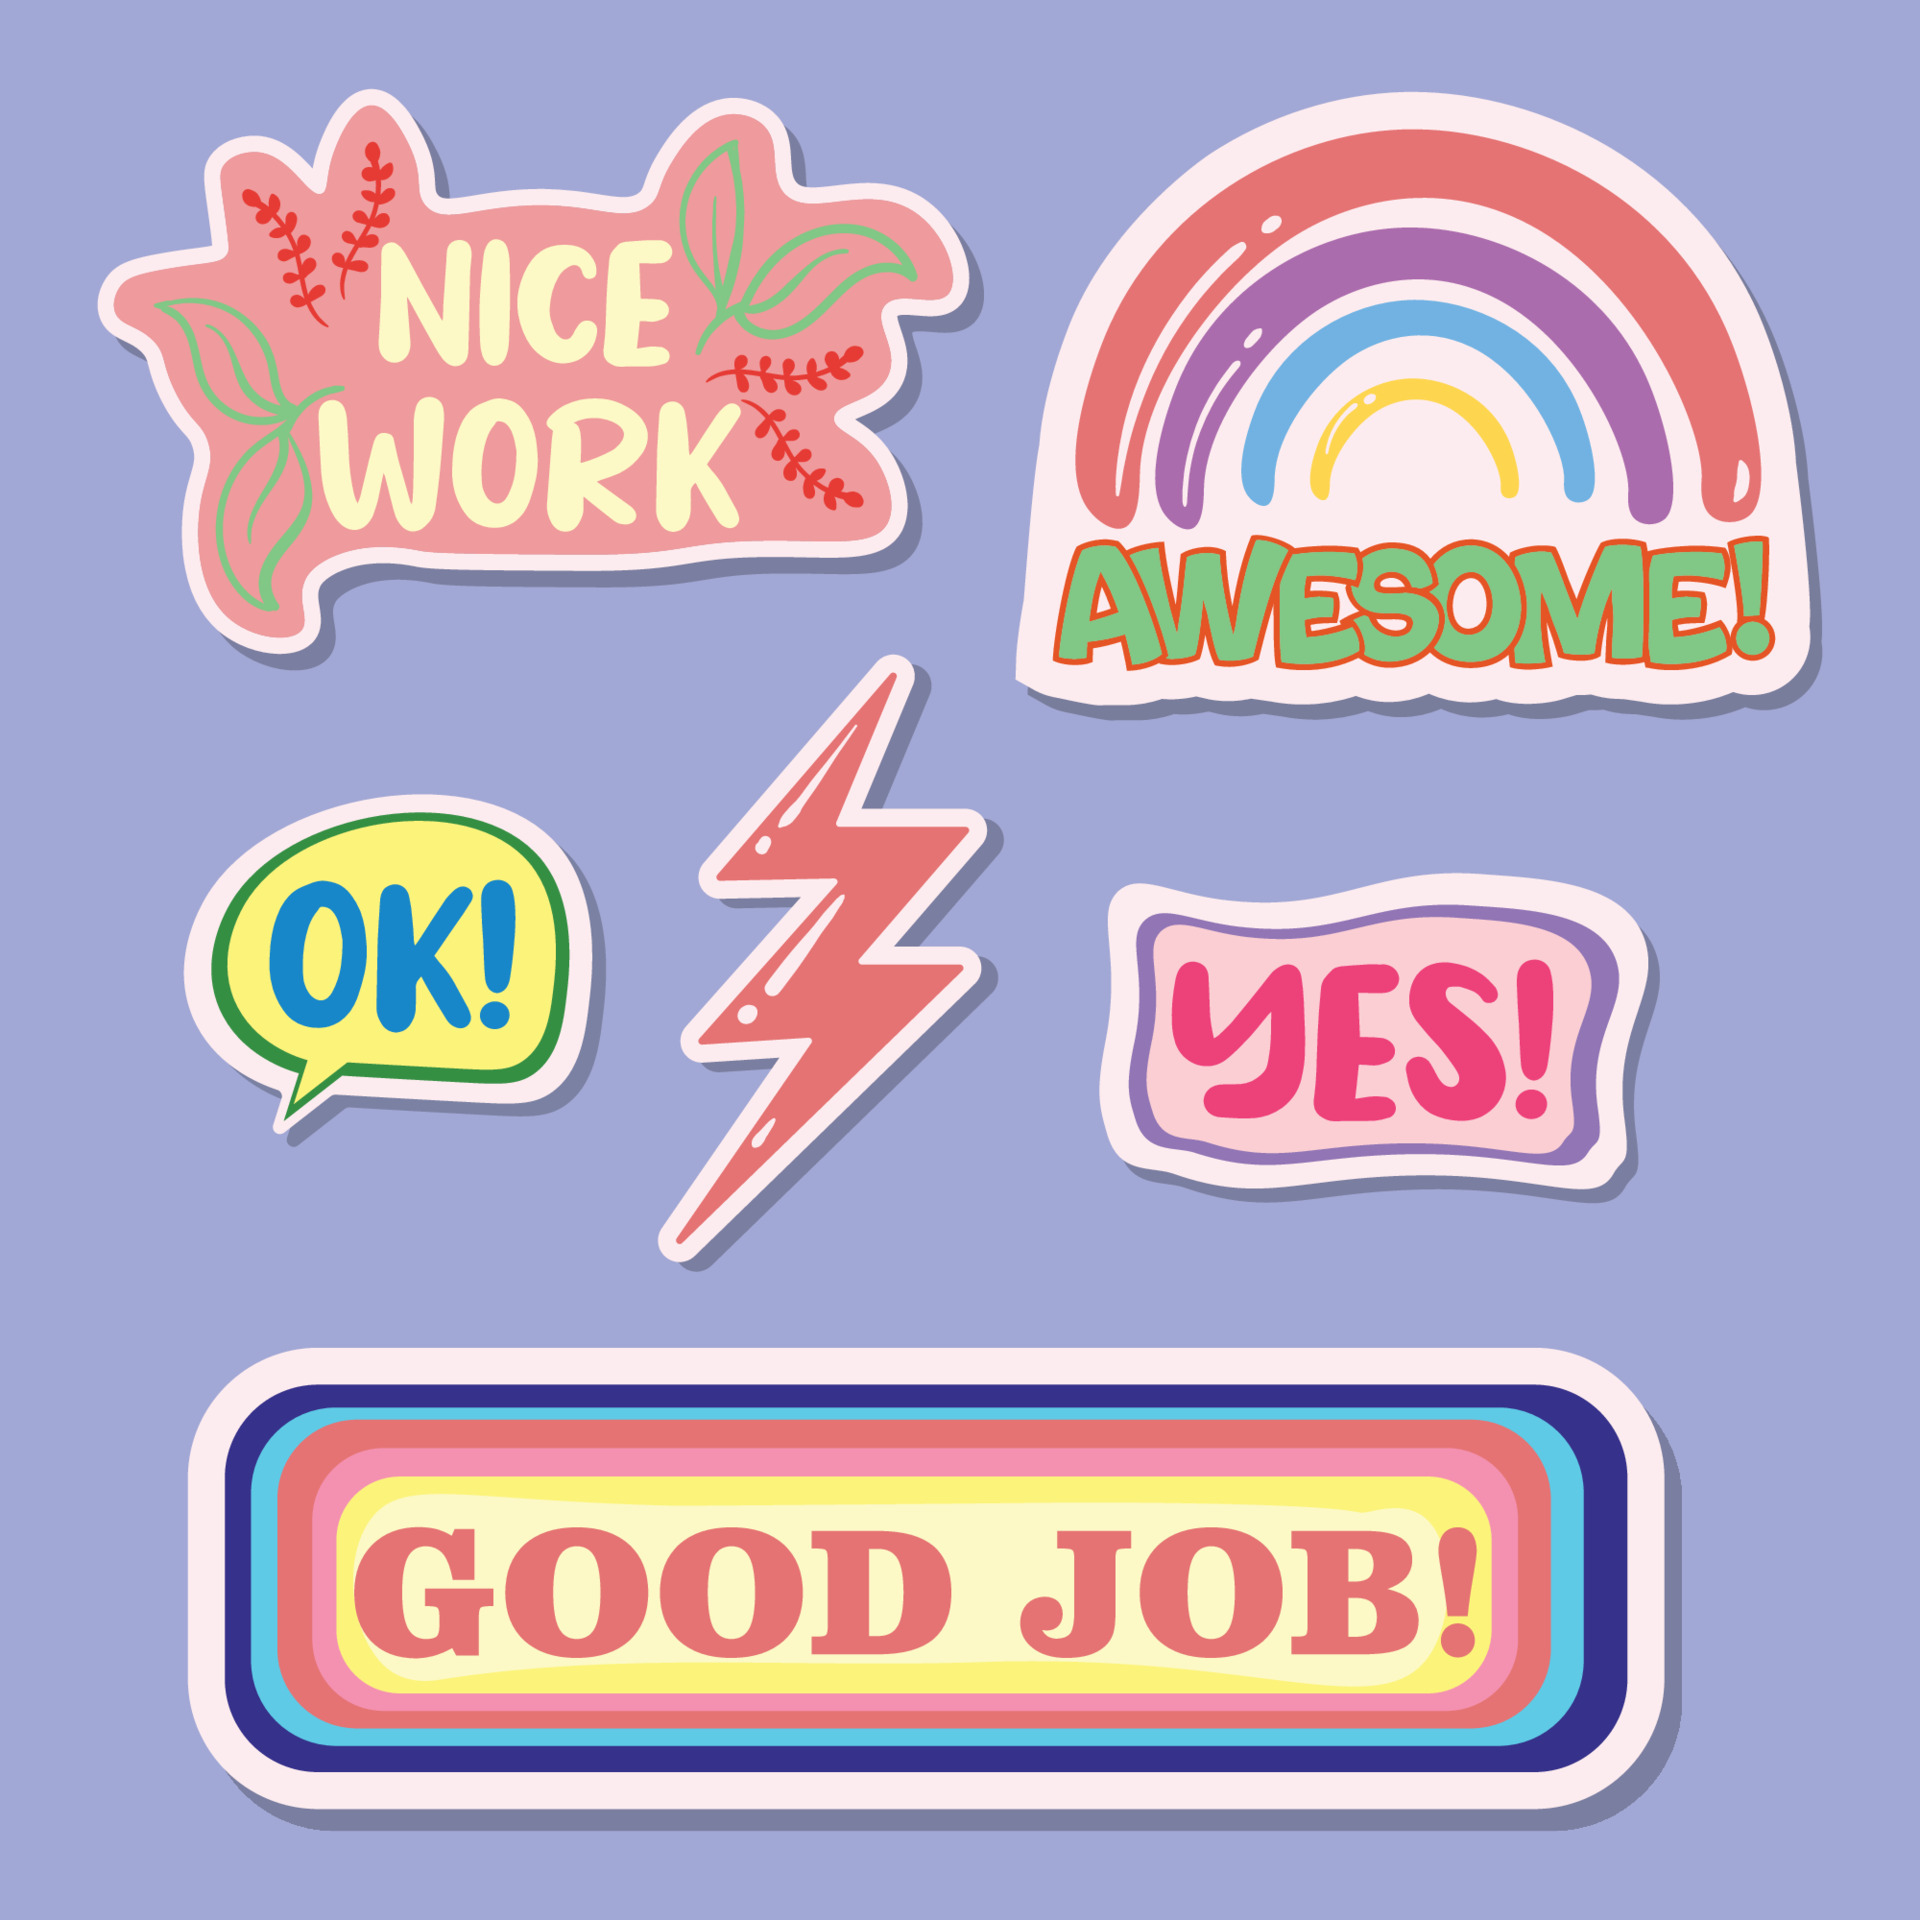 https://static.vecteezy.com/system/resources/previews/005/644/307/original/great-job-and-good-job-sticker-collection-free-vector.jpg